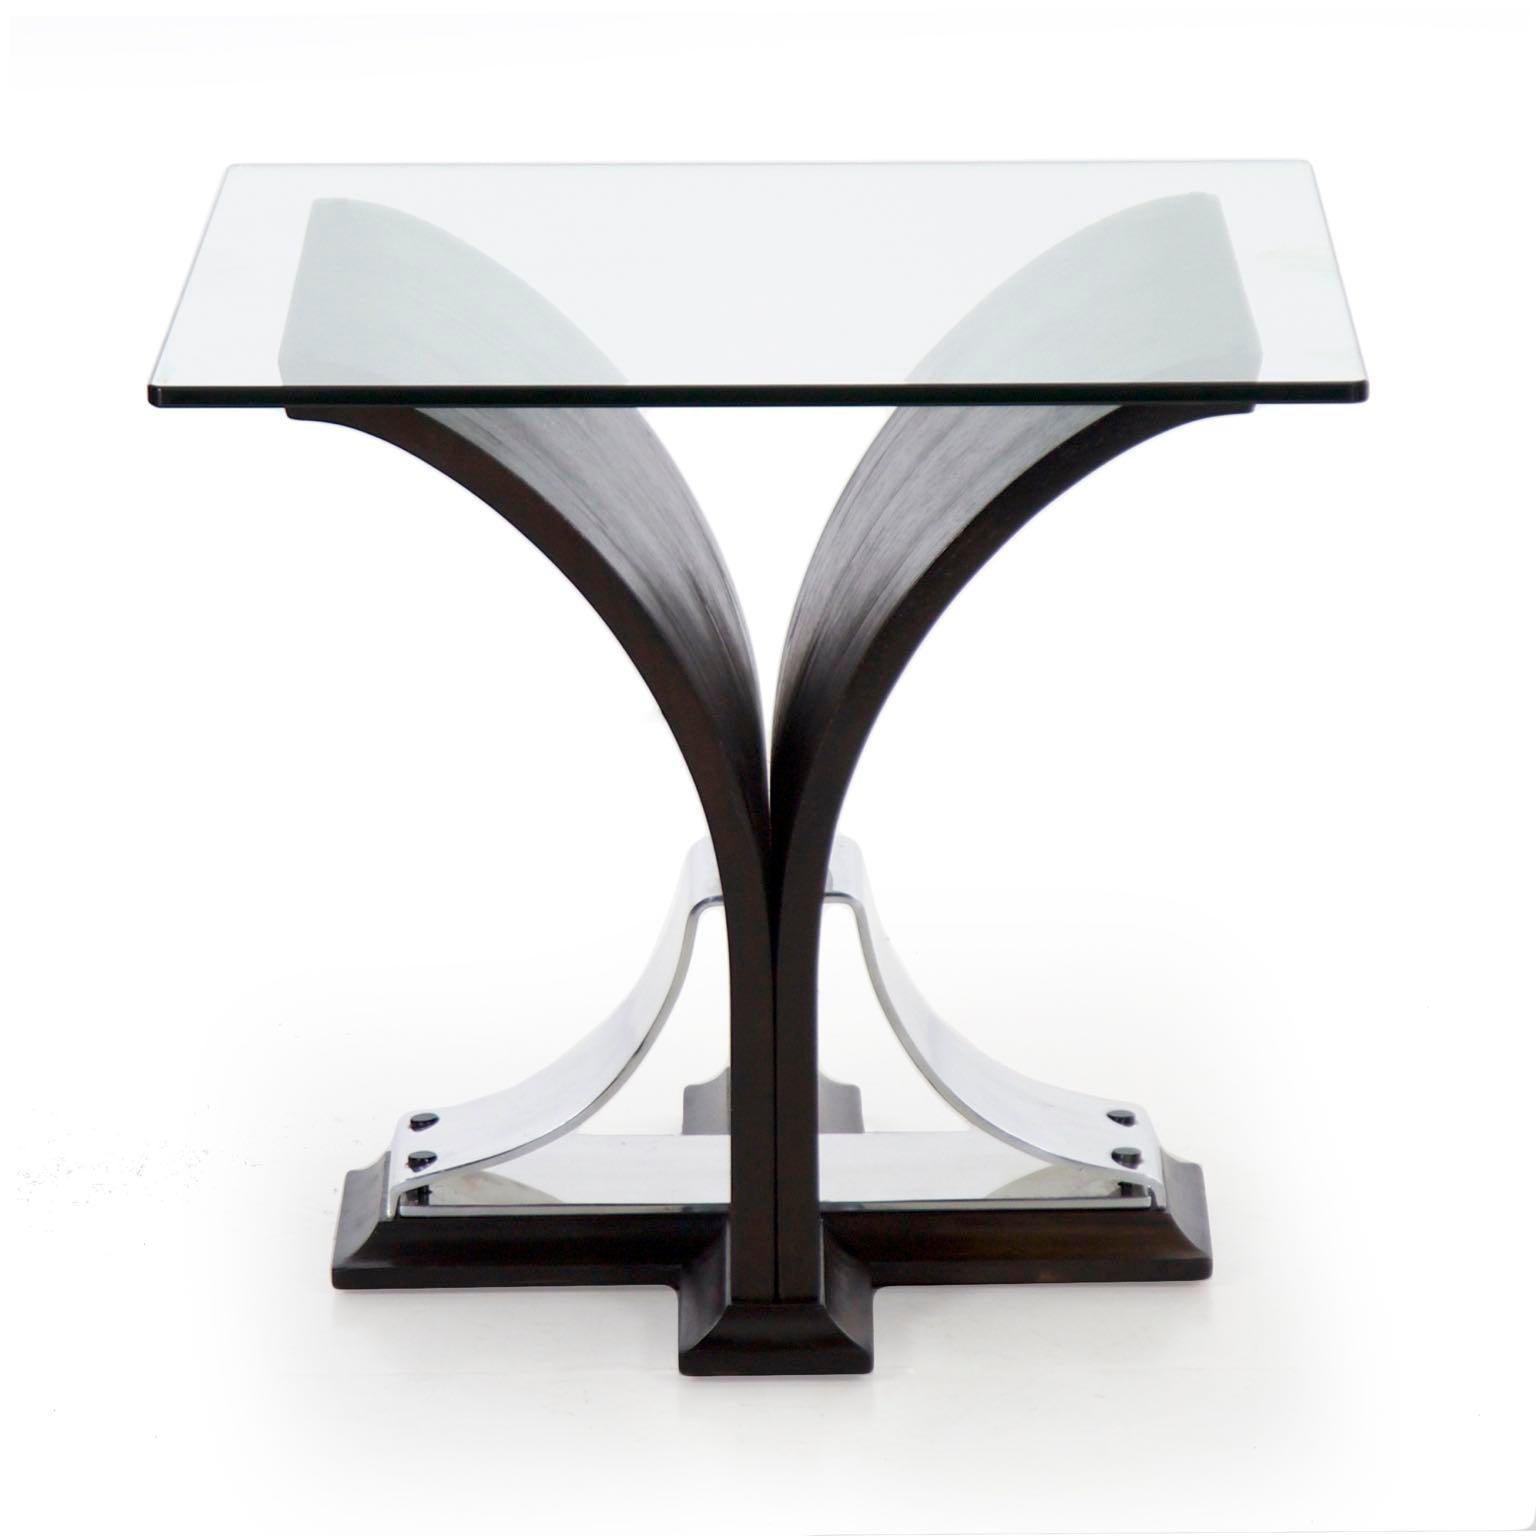 An unusual form inspired by the Streamline Moderne movement of the Art Deco period, this table was likely crafted during the late 1920s in the United States. Utilizing ebonized walnut veneers in a sprouted form, the table is a statement of